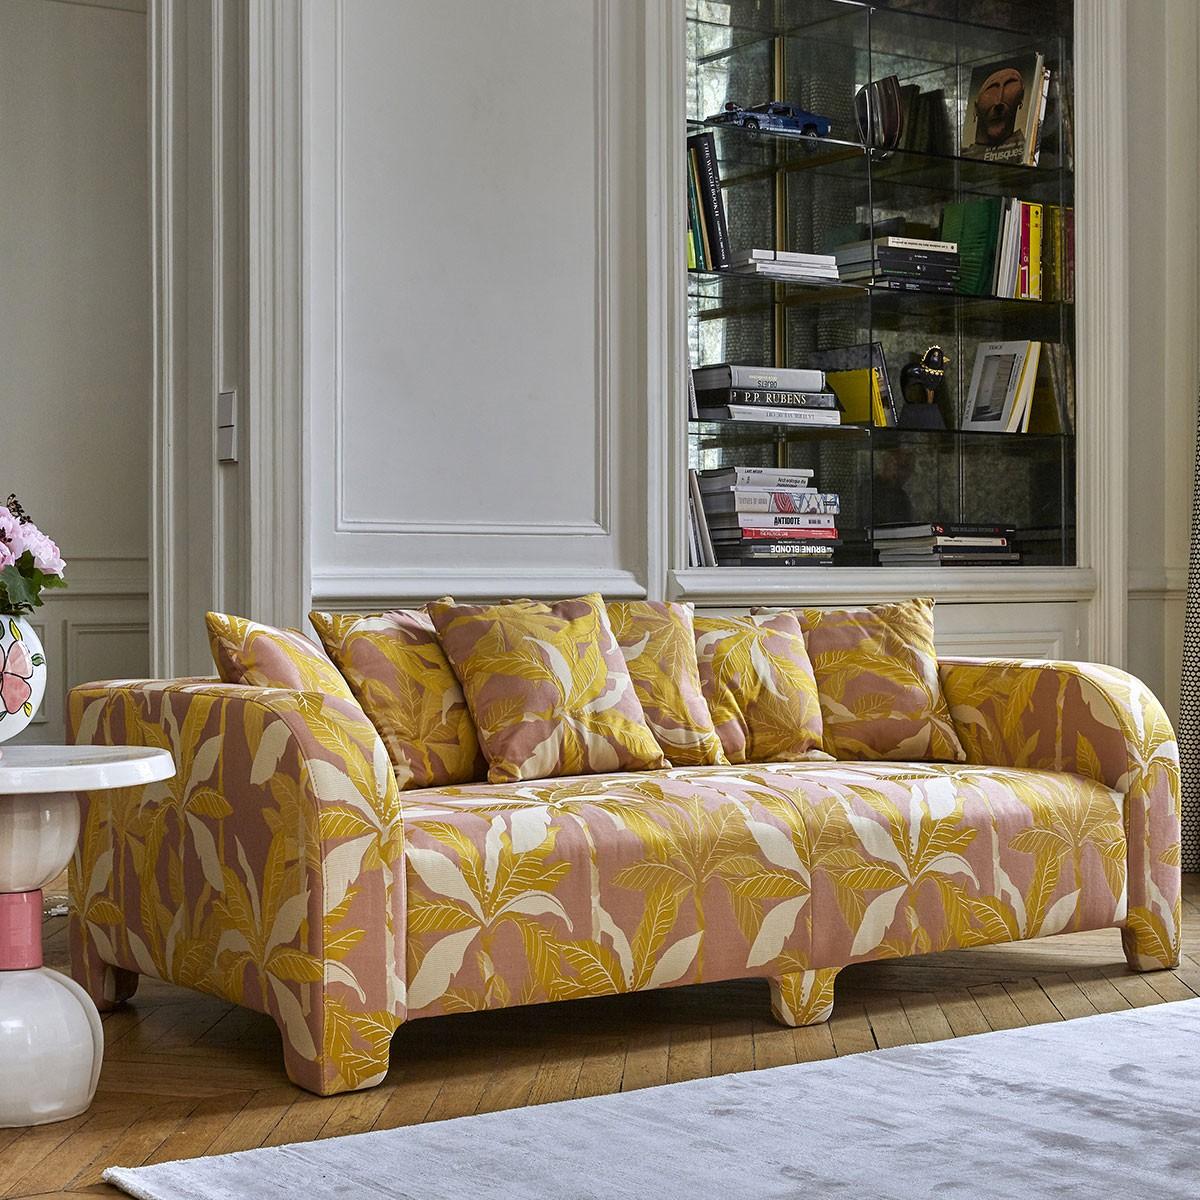 Popus editions graziella 2 seater sofa in amber como velvet upholstery.

A foot that hides another. A cushion that hides another. A curve that hides another with contemporary lines and a base like a punctuation mark, this sofa gives pride of place